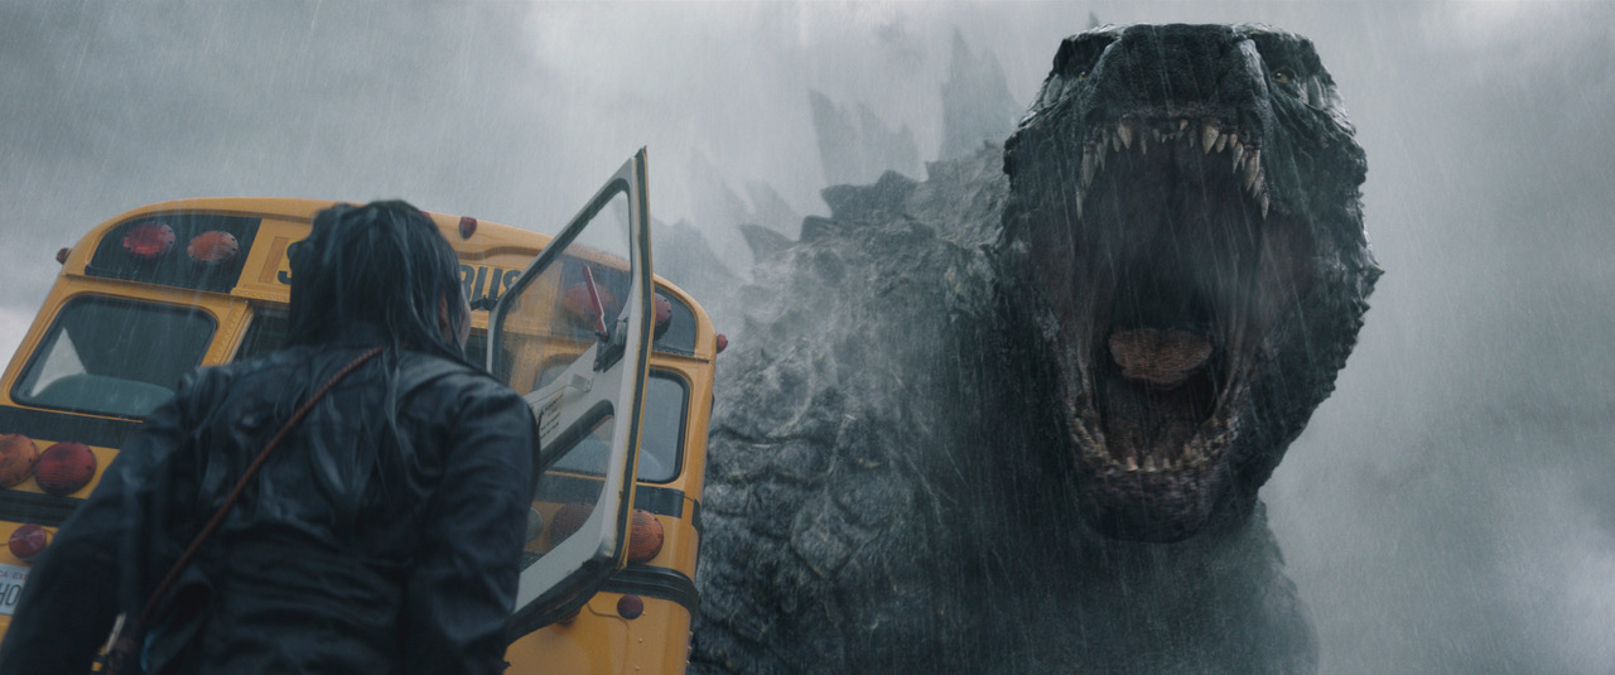 Apple TV+’s Godzilla Show Gets First Trailer That Teases a Gigantic Mystery for Kaiju Fans